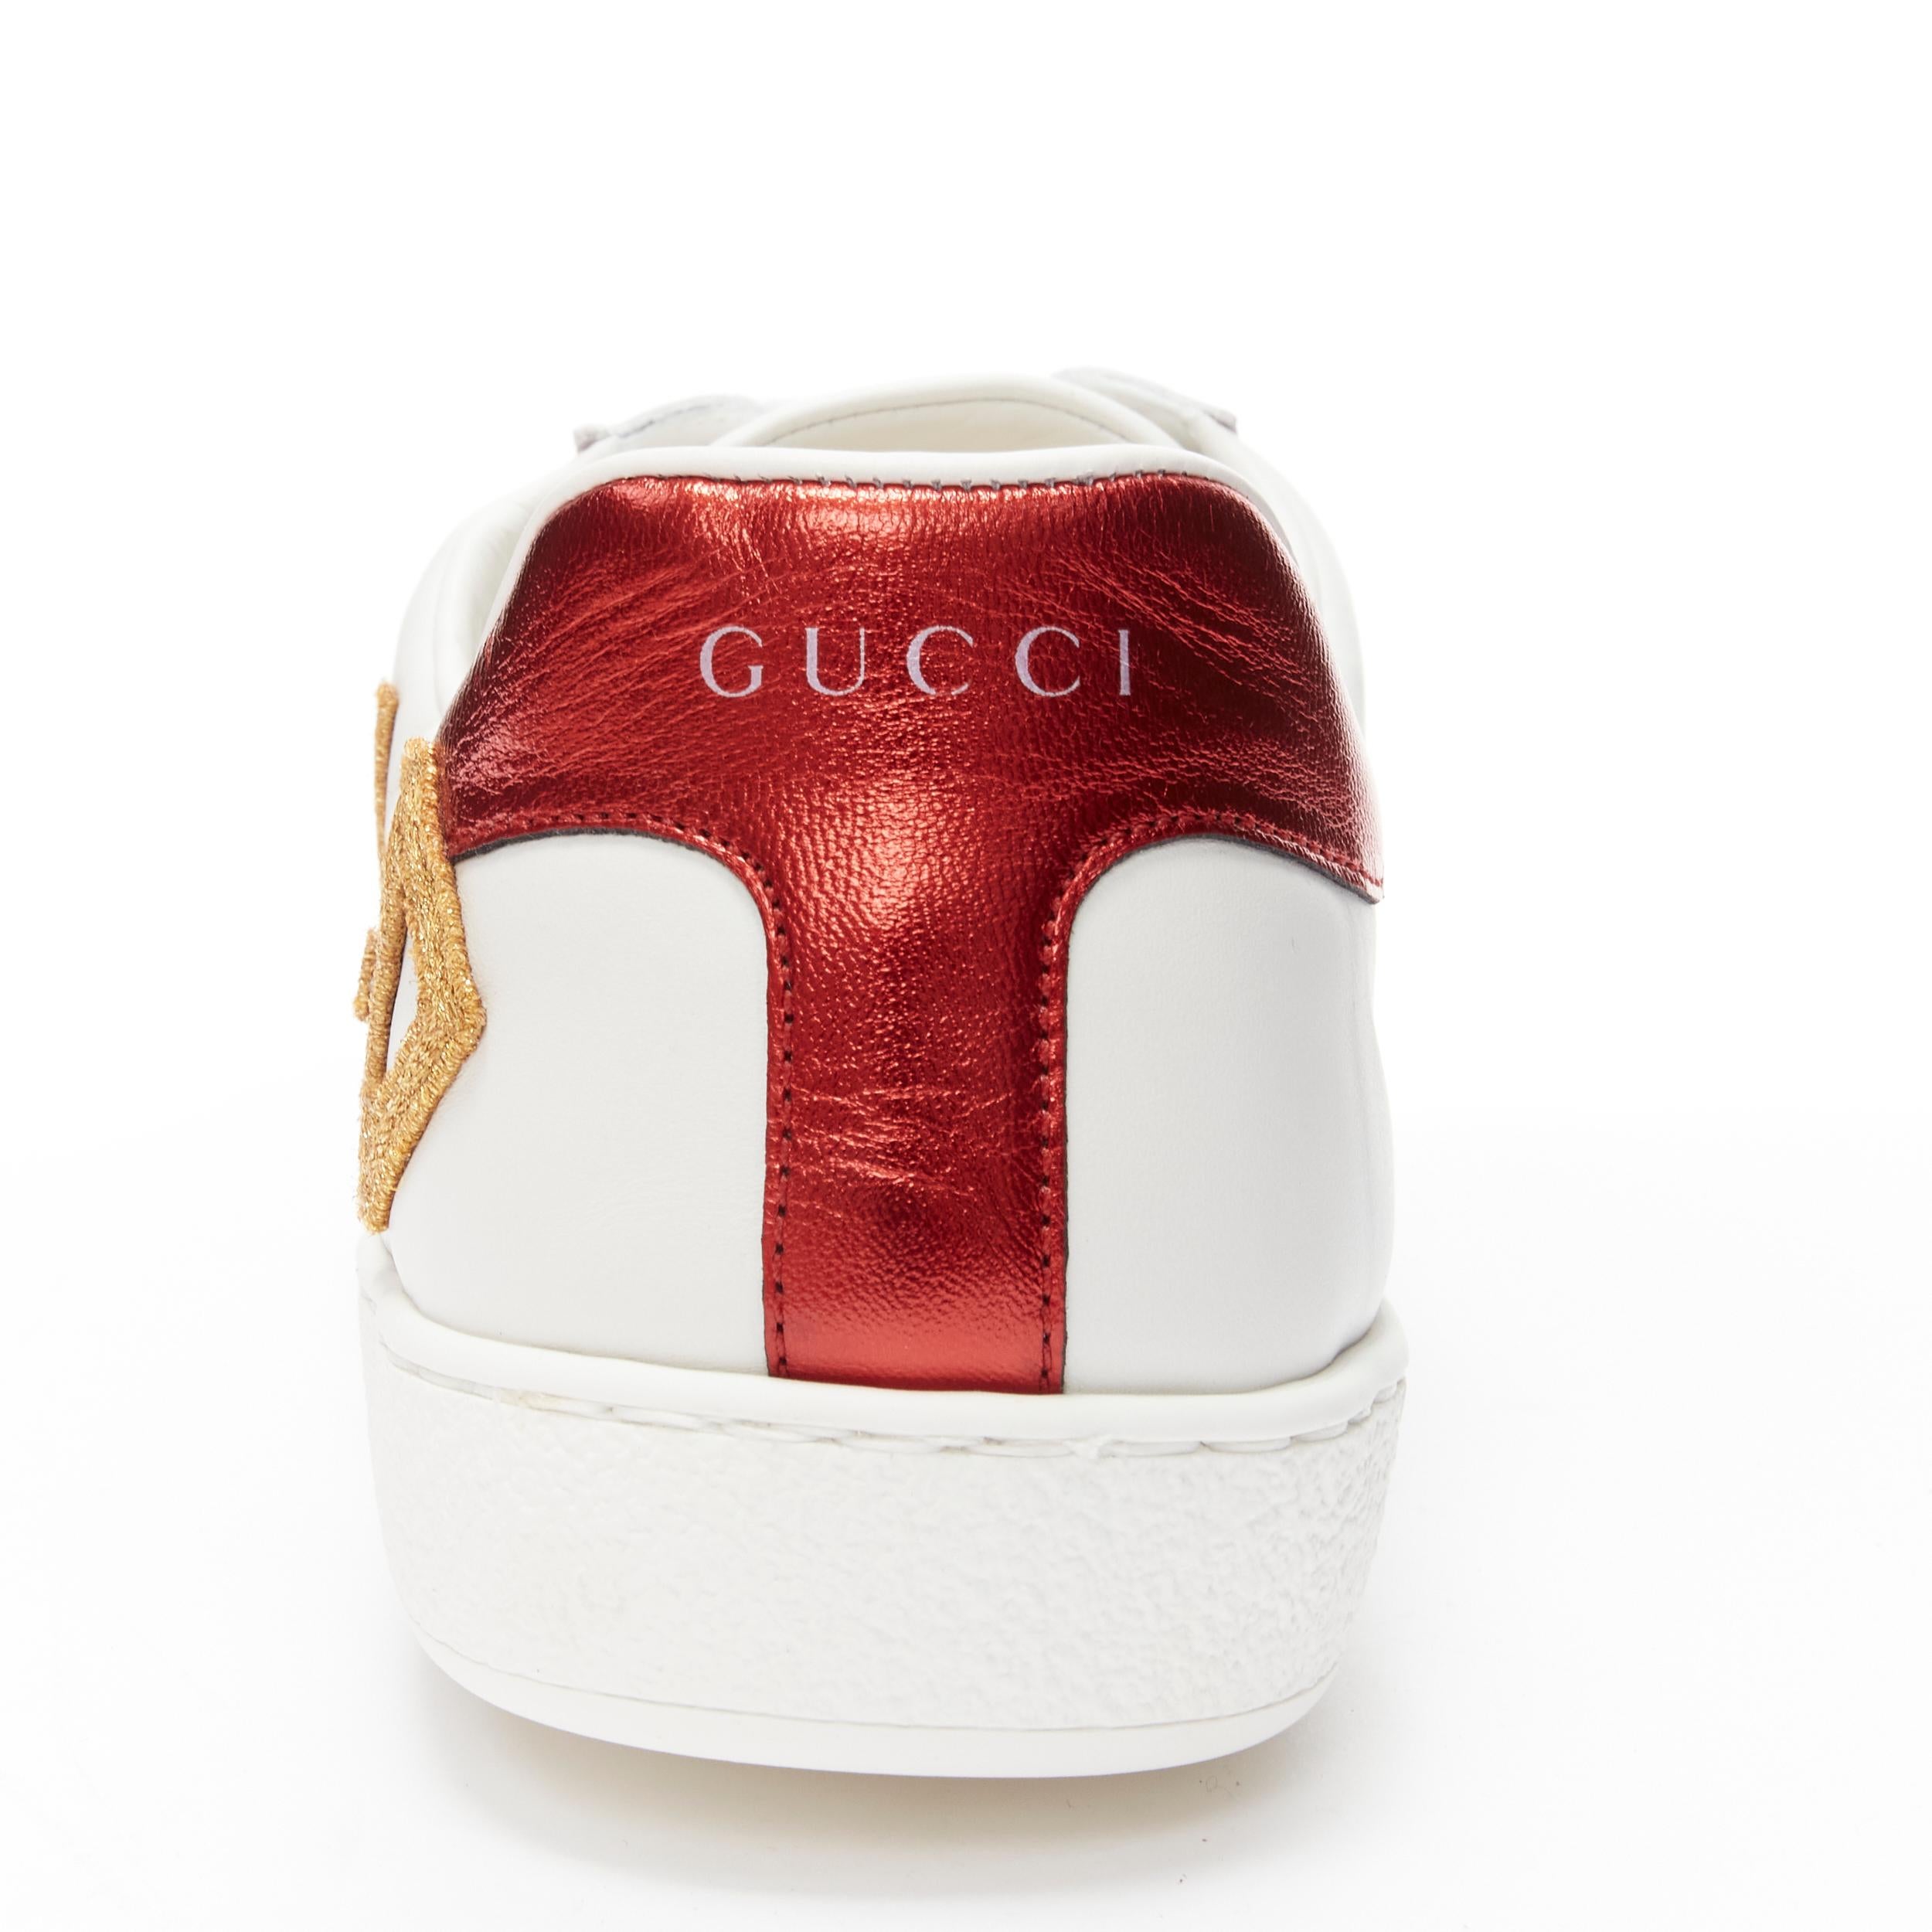 GUCCI Ace Loved gold letter patchwork white navy red web sneaker UK9 EU43 For Sale 3